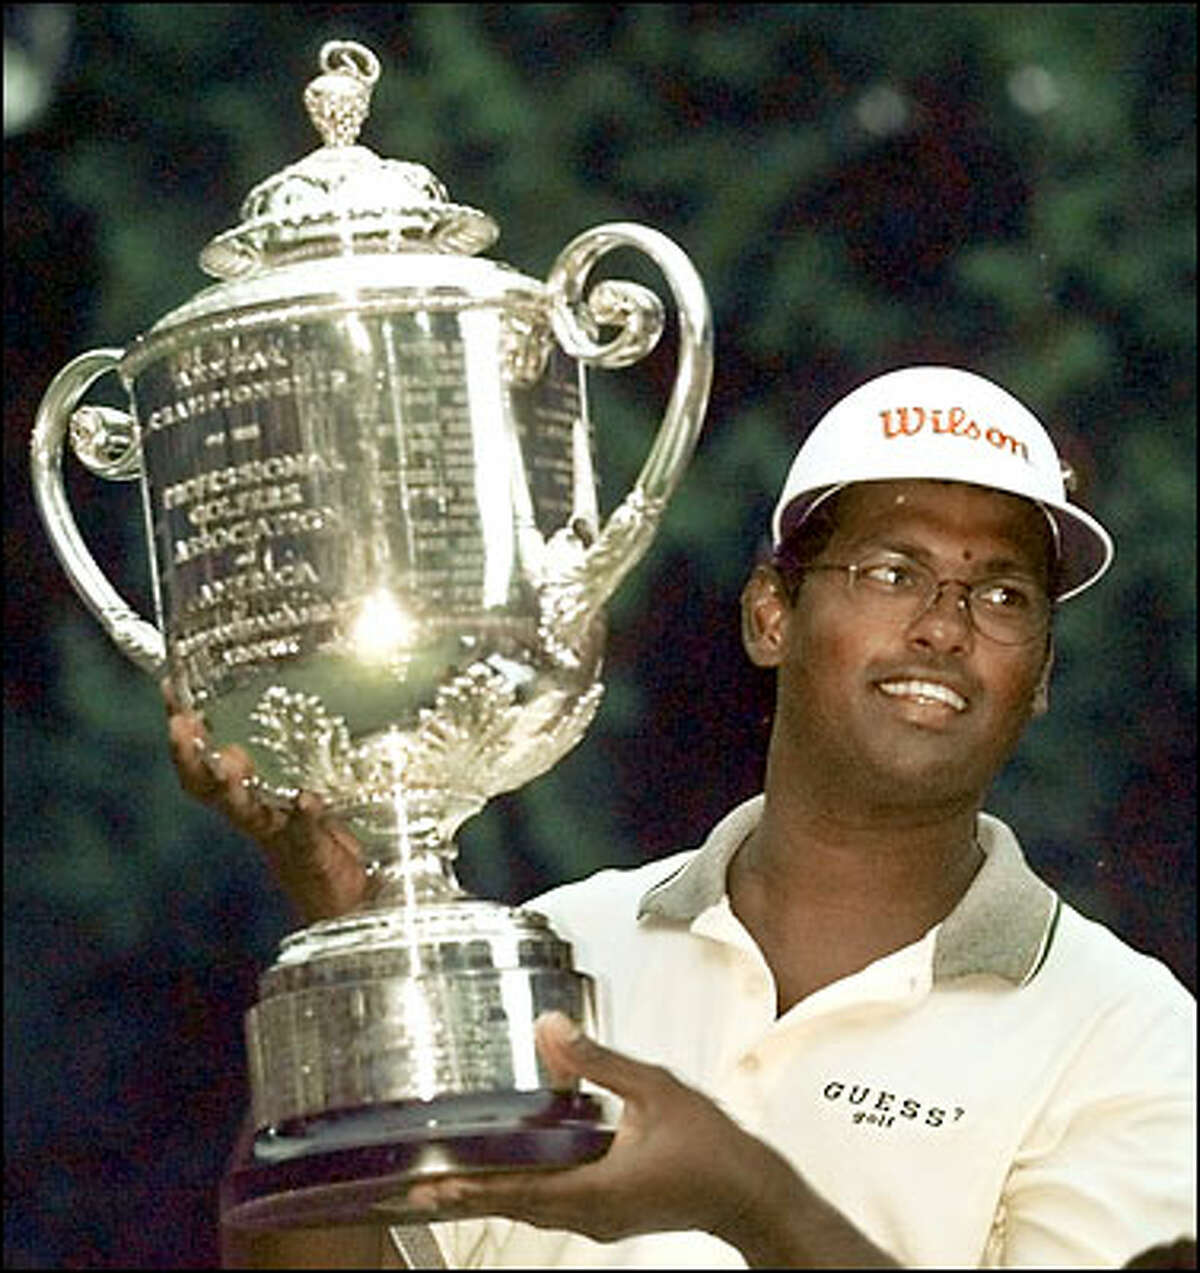 Vijay Singh adjusted his power game to the confines of Sahalee Country Club and held off Steve Stricker to win the 1998 PGA Championship.